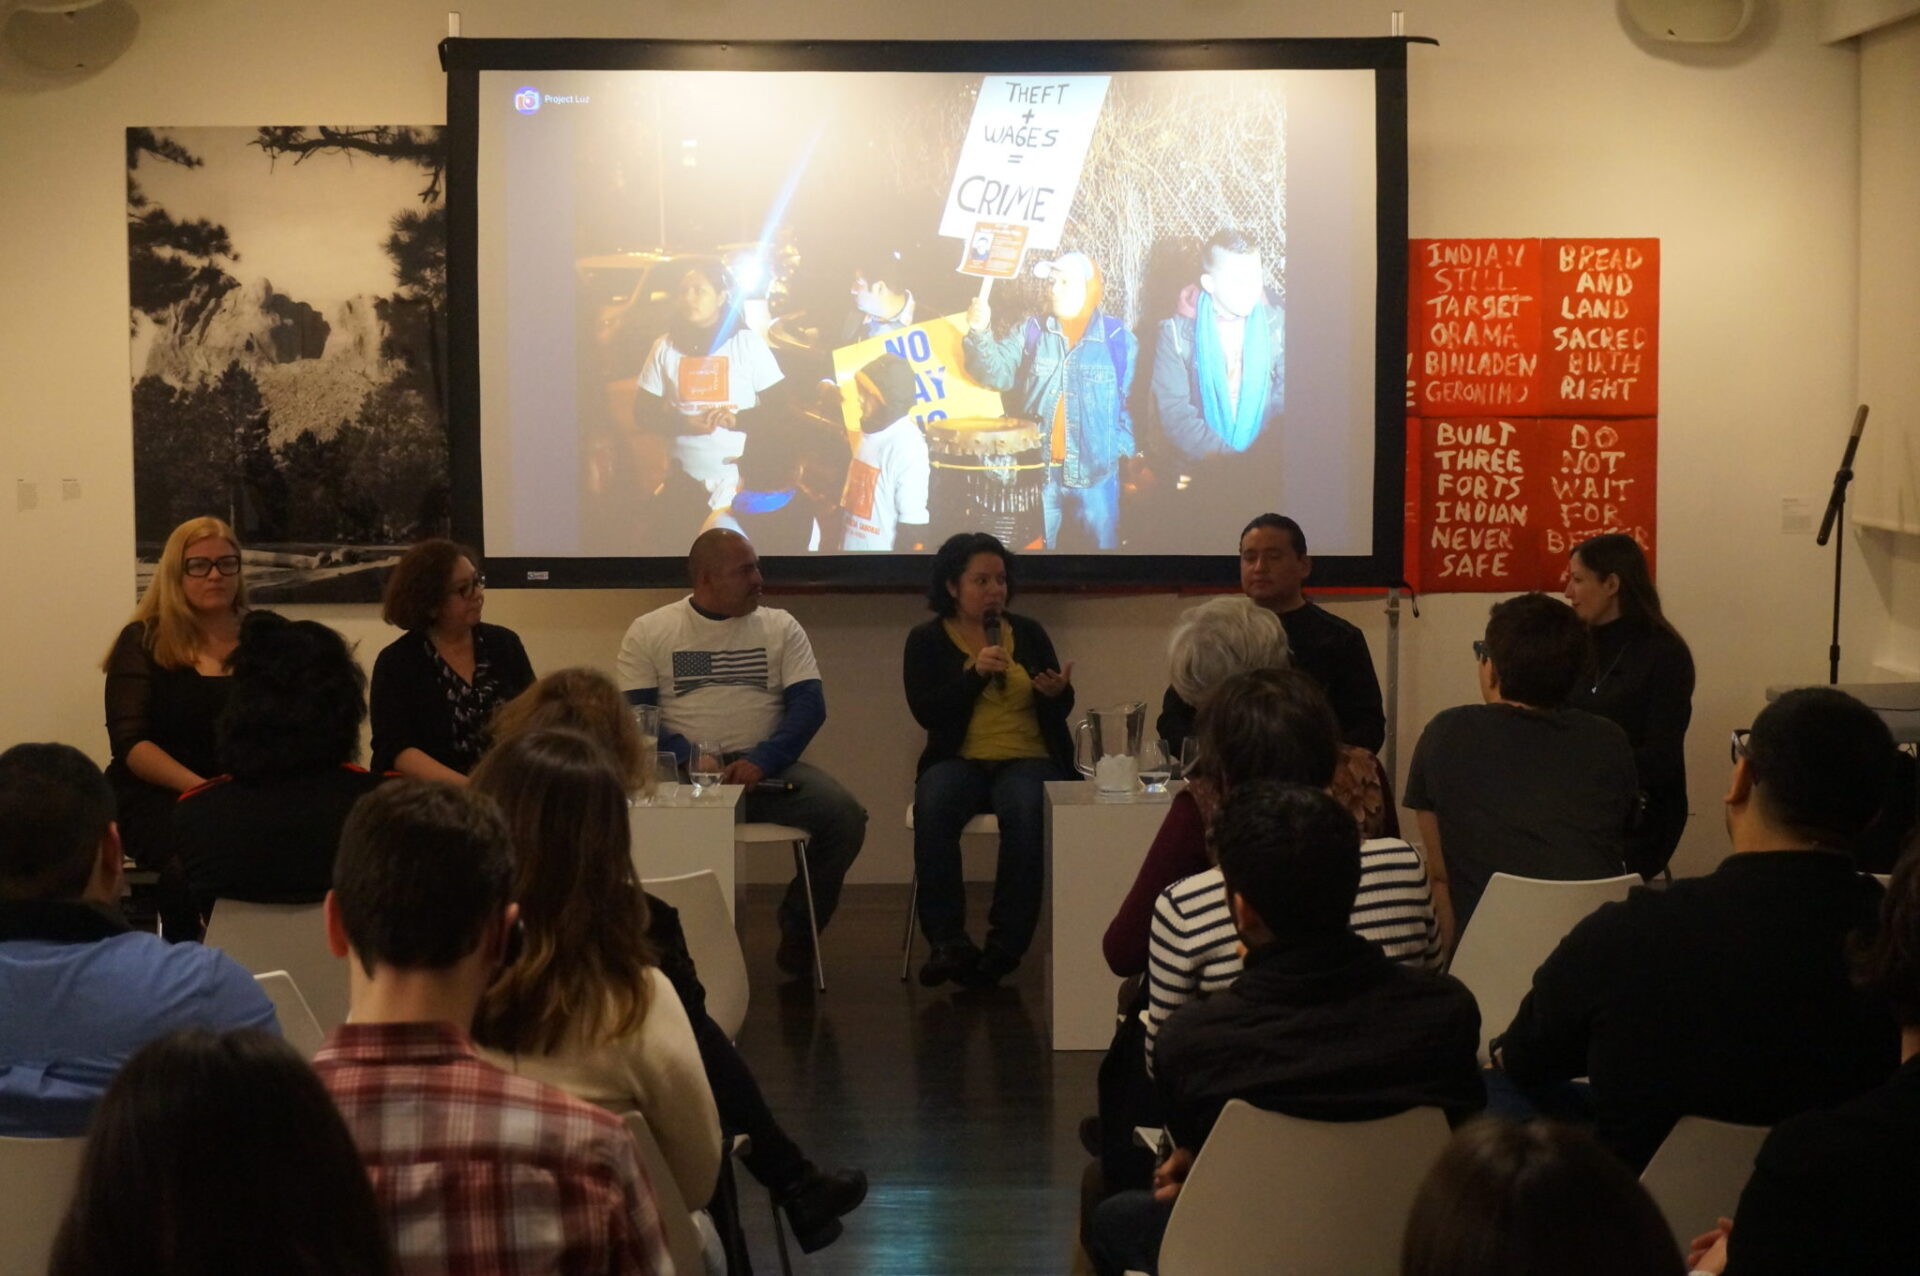 Reports from the Field: Apps for Power, The 8th Floor, February 23, 2016. From left to right: Sol Aramendi, Maria Figueroa, Felix Guzman, Nadia Marin, Omar Trinidad and Elizabeth Grady. Photo: Joelle Te Paske